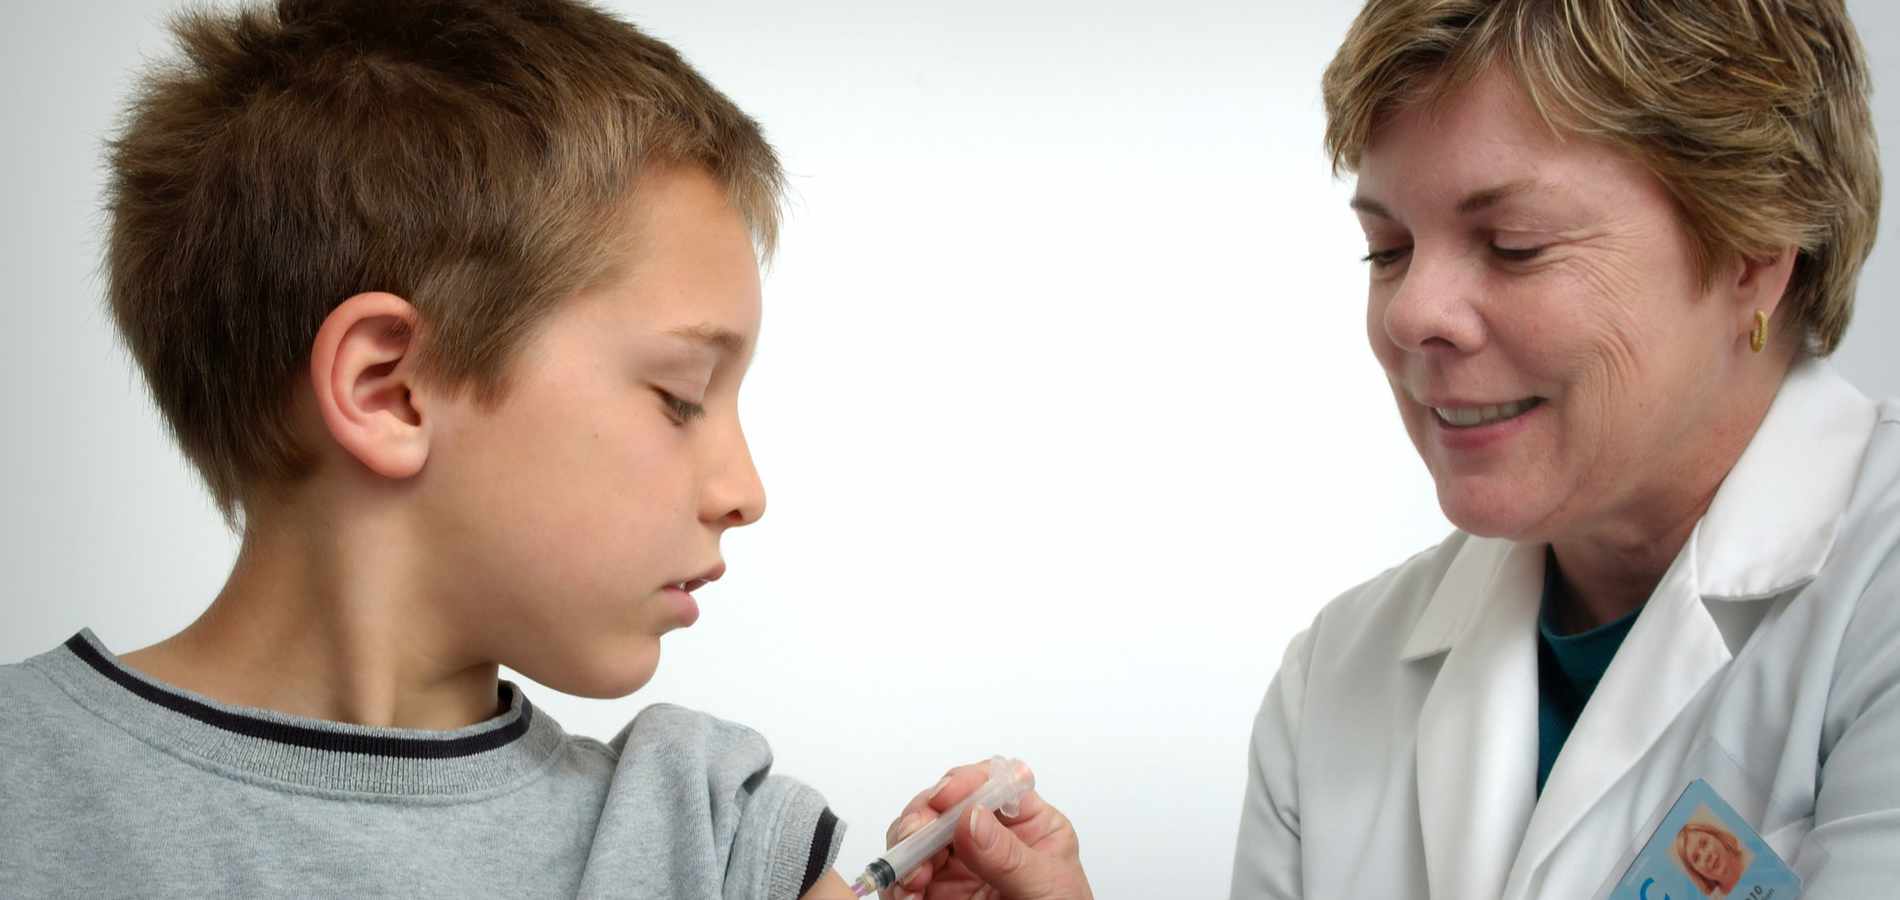 Immunotherapy is cost-effective in treating children with dust mite allergic asthma